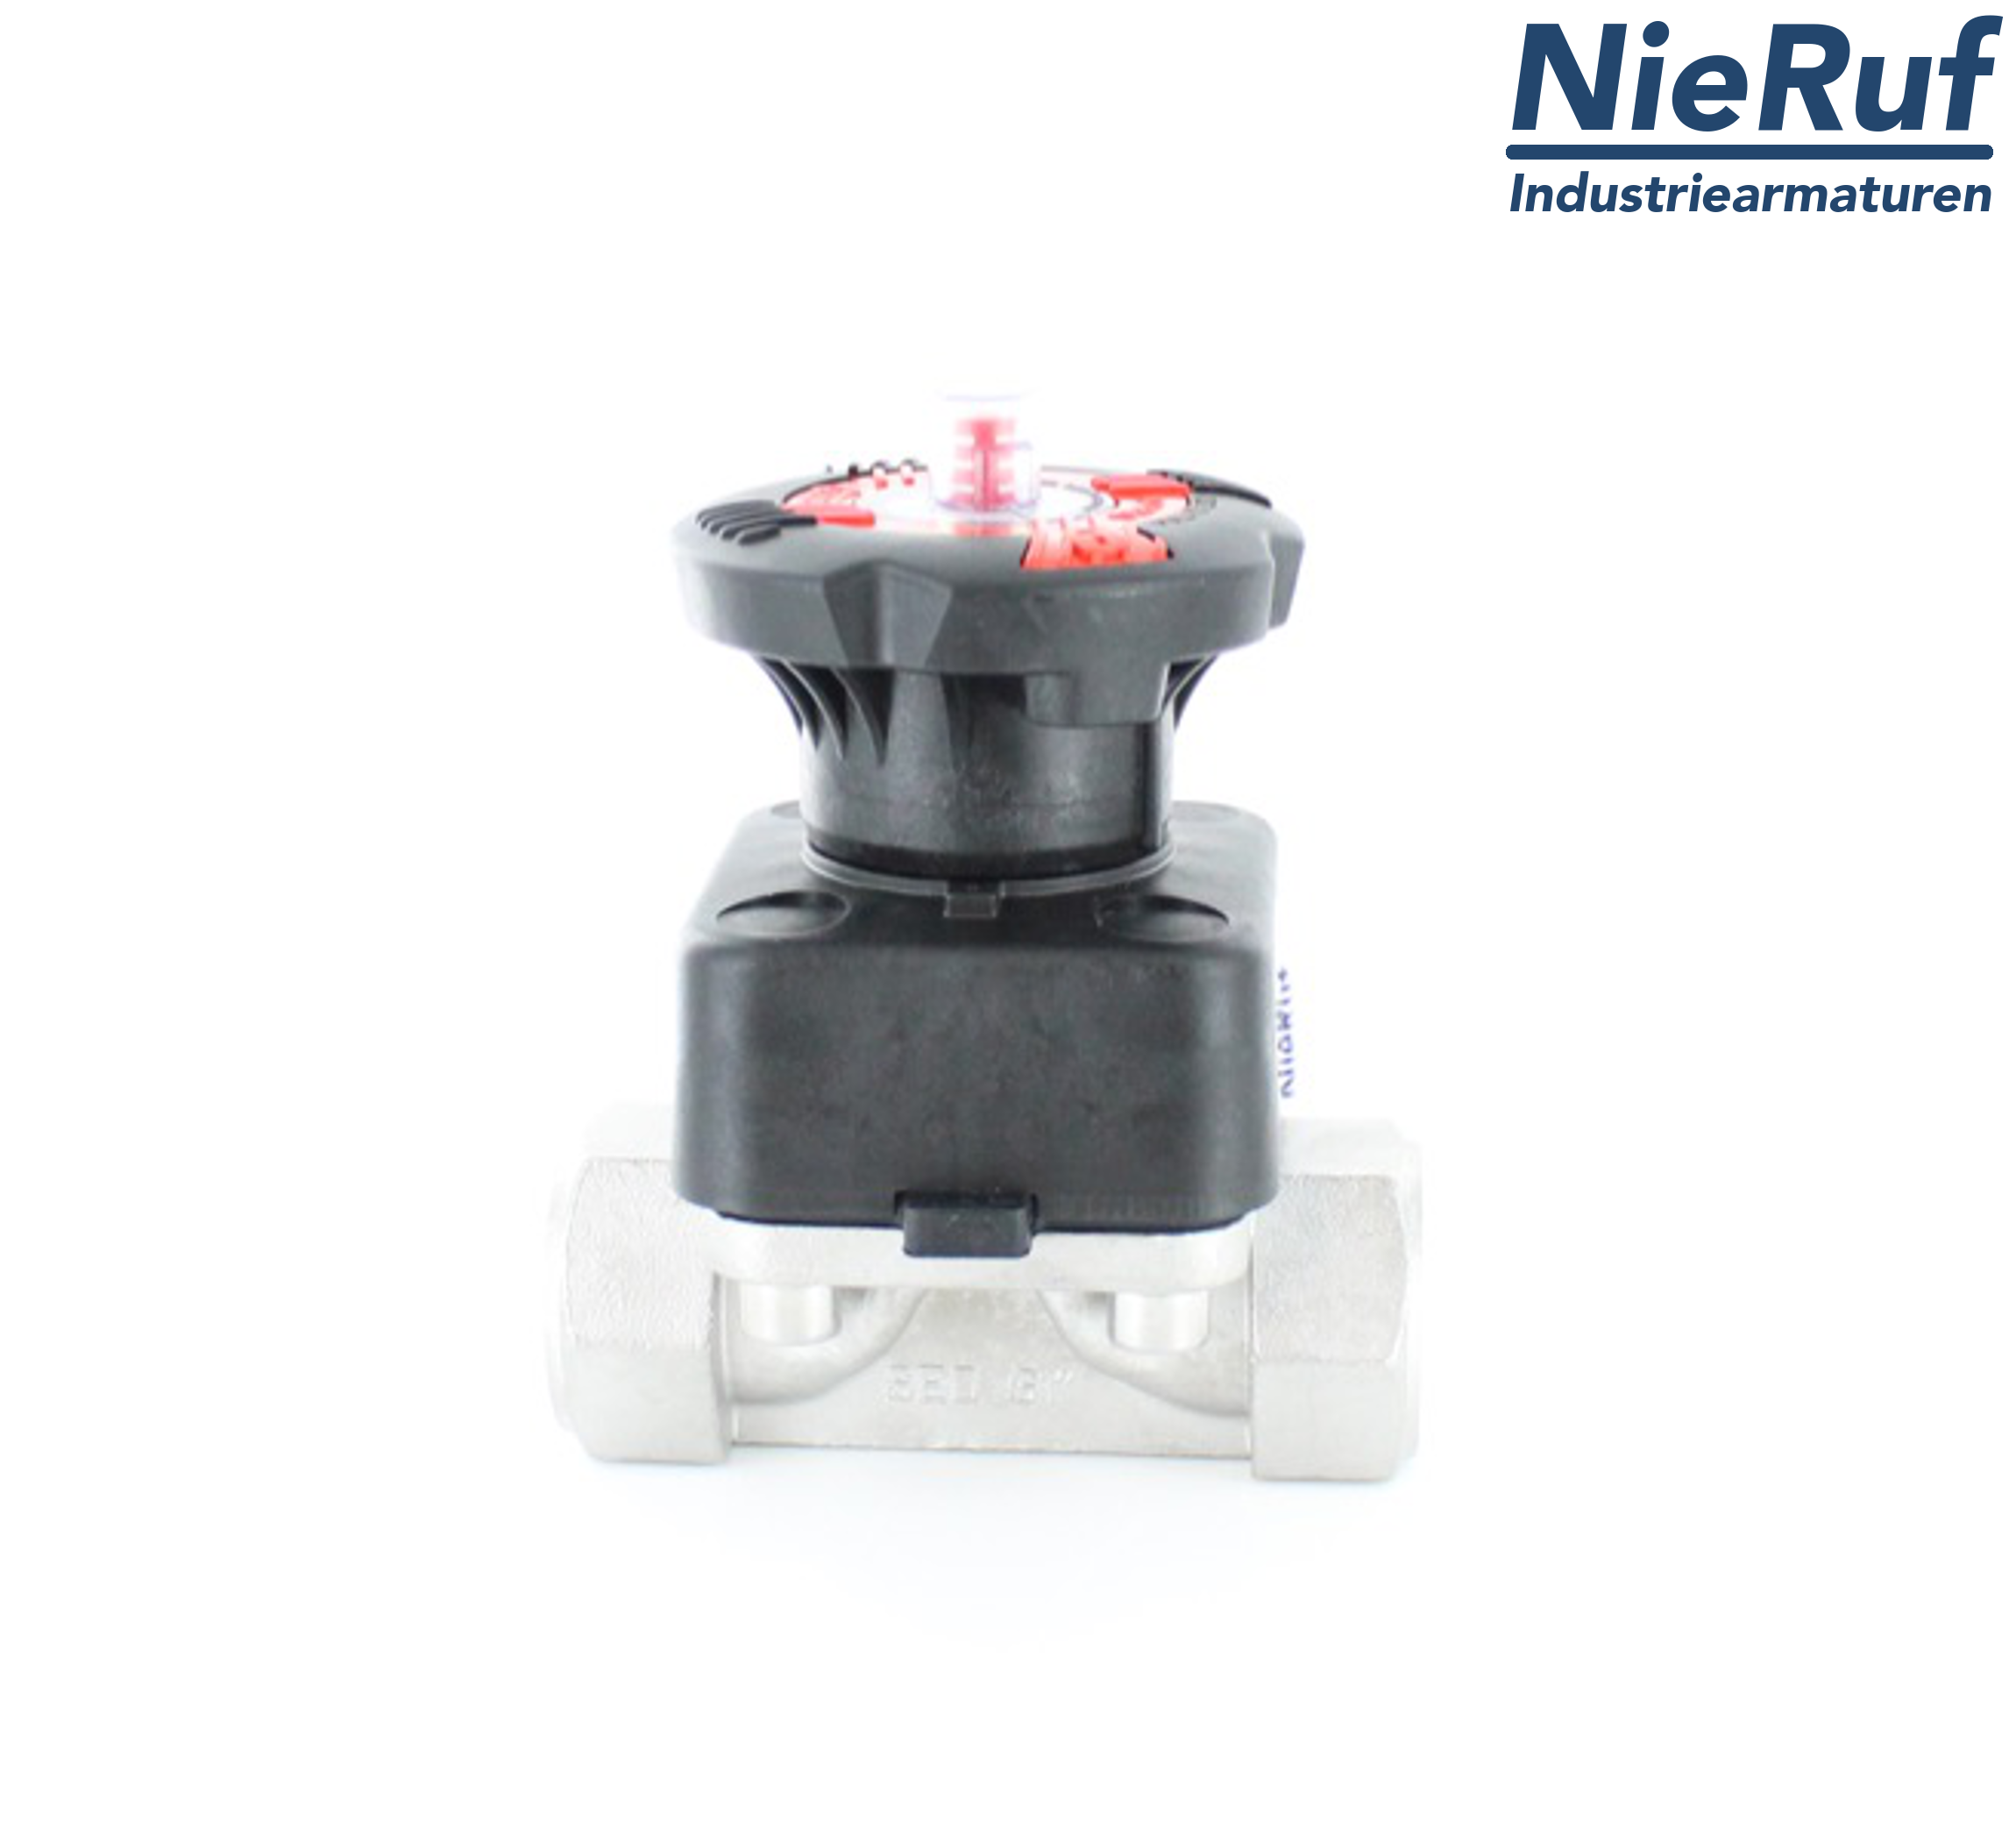 stainless steel-diaphragm valve 1 1/4 Inch membrane PTFE/EPDM two-piece female thread BSP